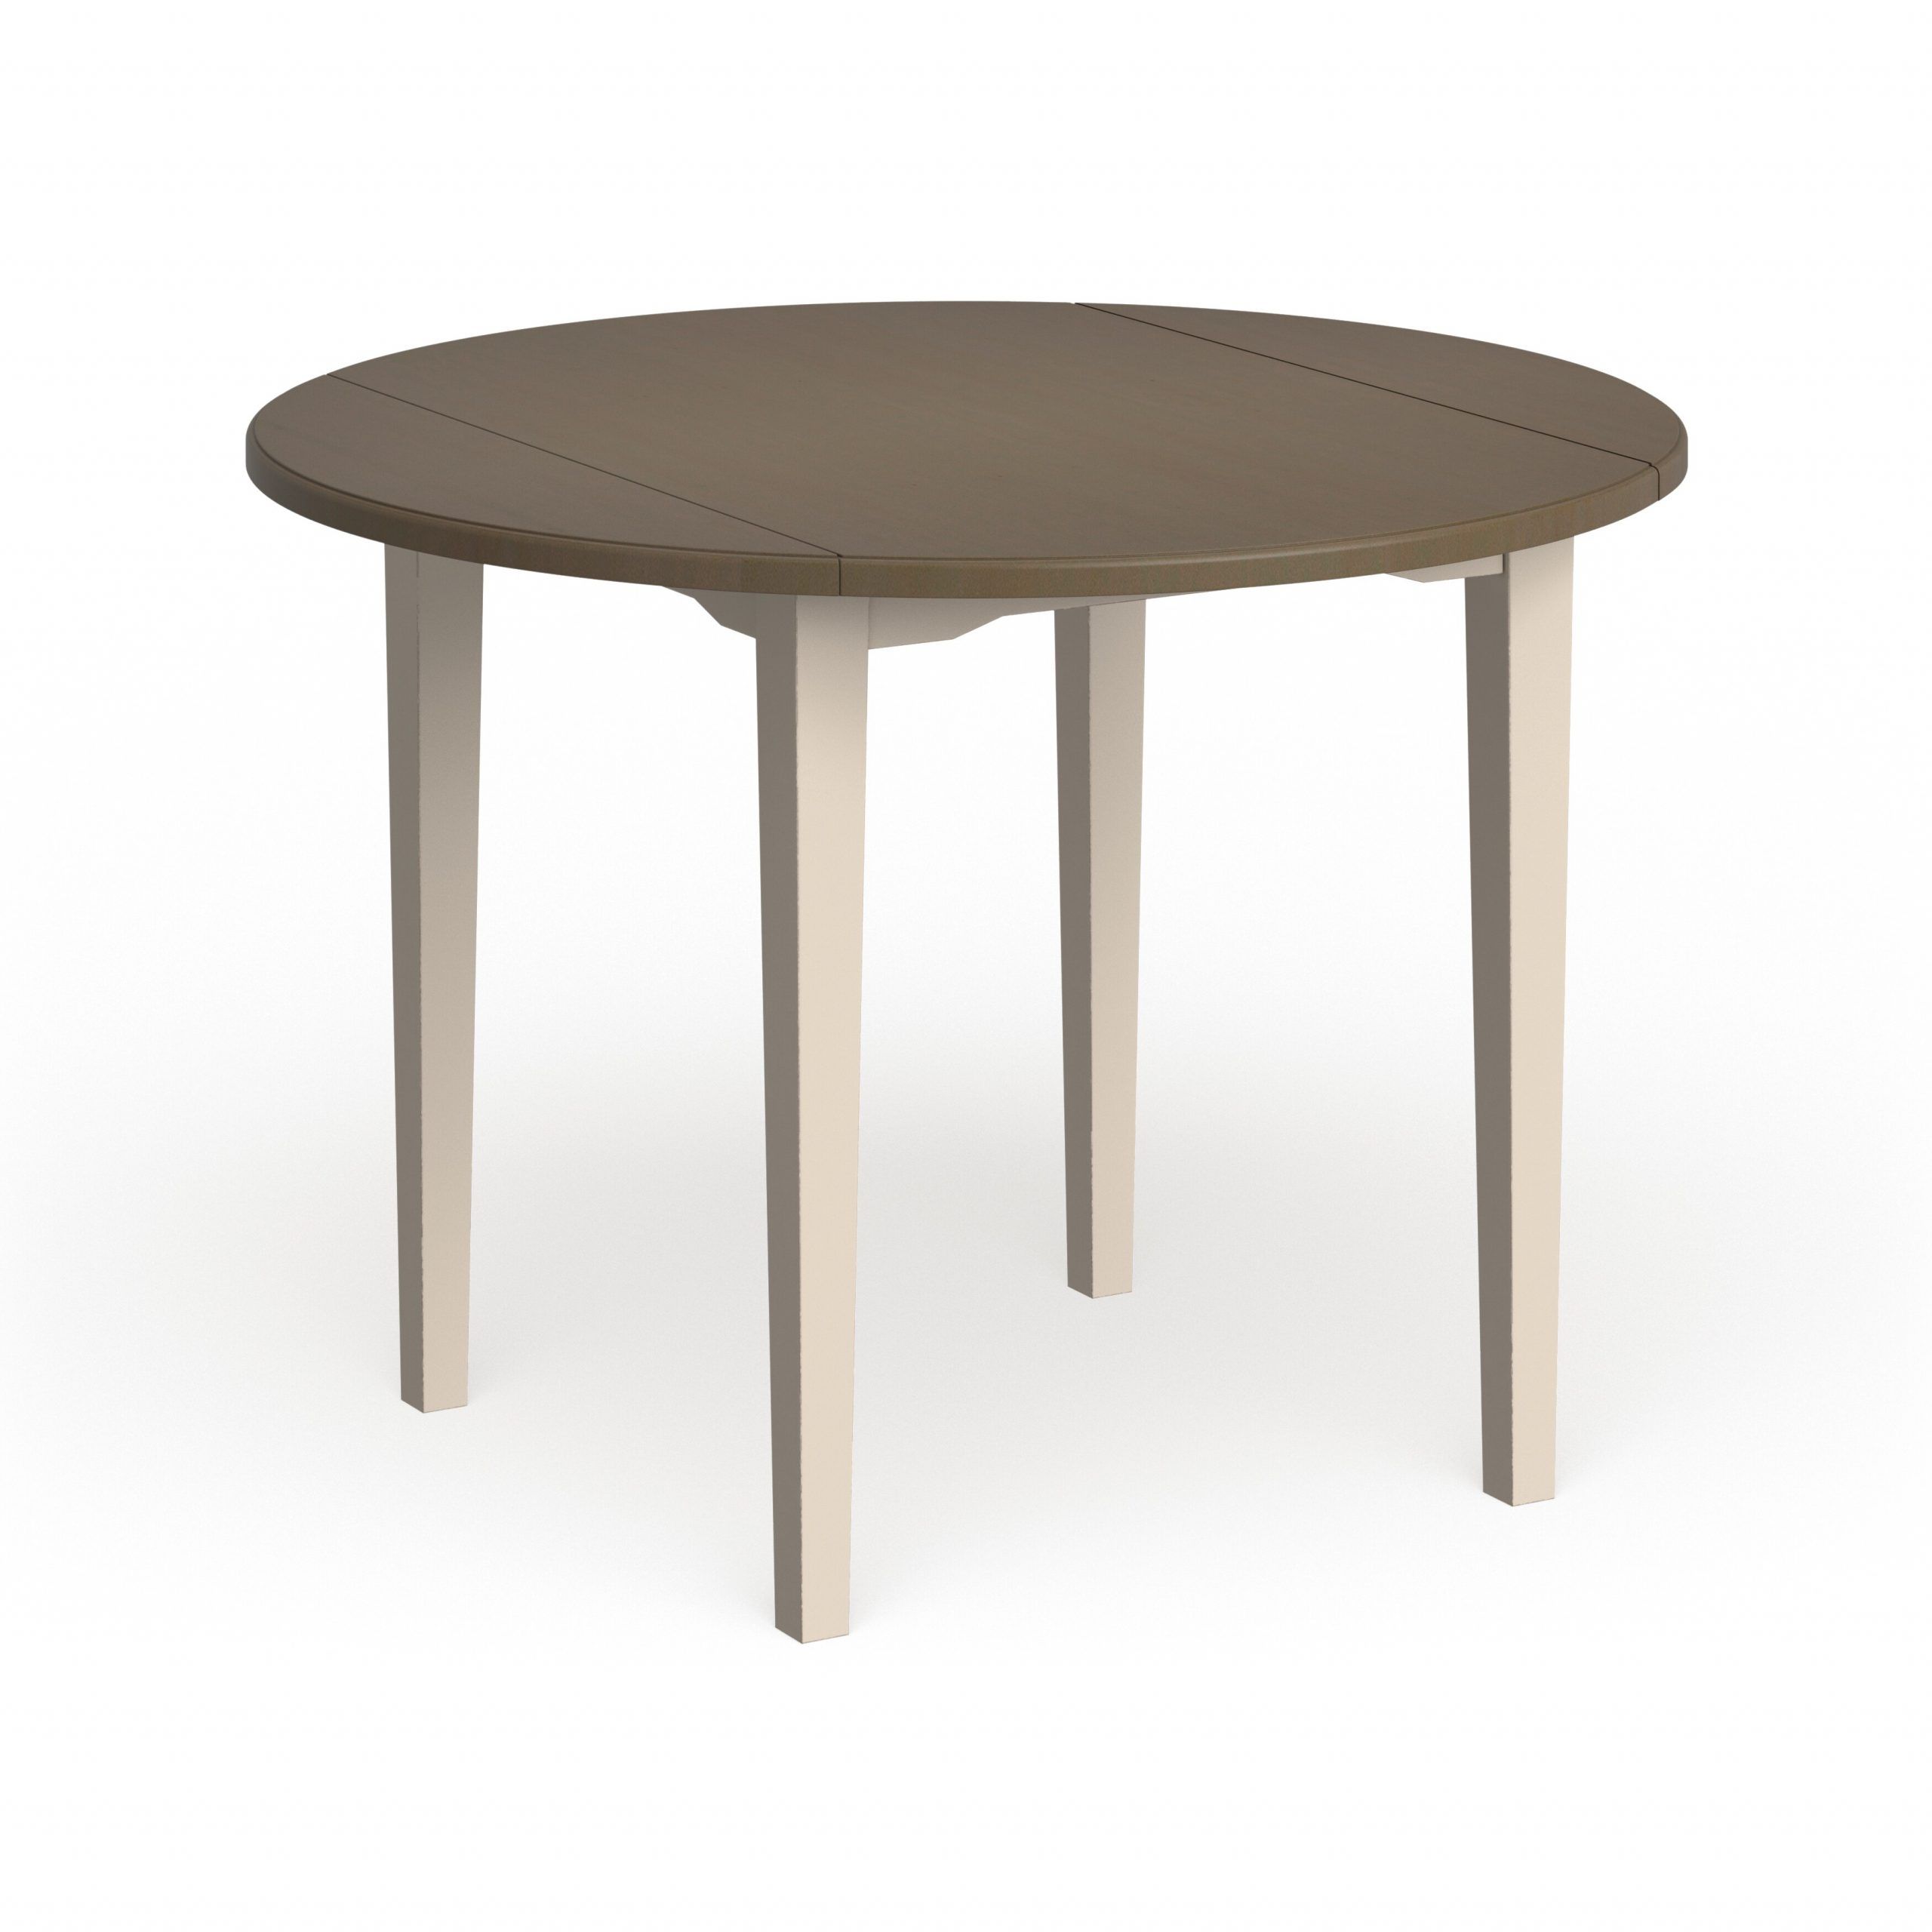 The Gray Barn Steeplechase Sea White – Grey Round Drop Throughout Most Recently Released Gray Drop Leaf Tables (View 13 of 15)